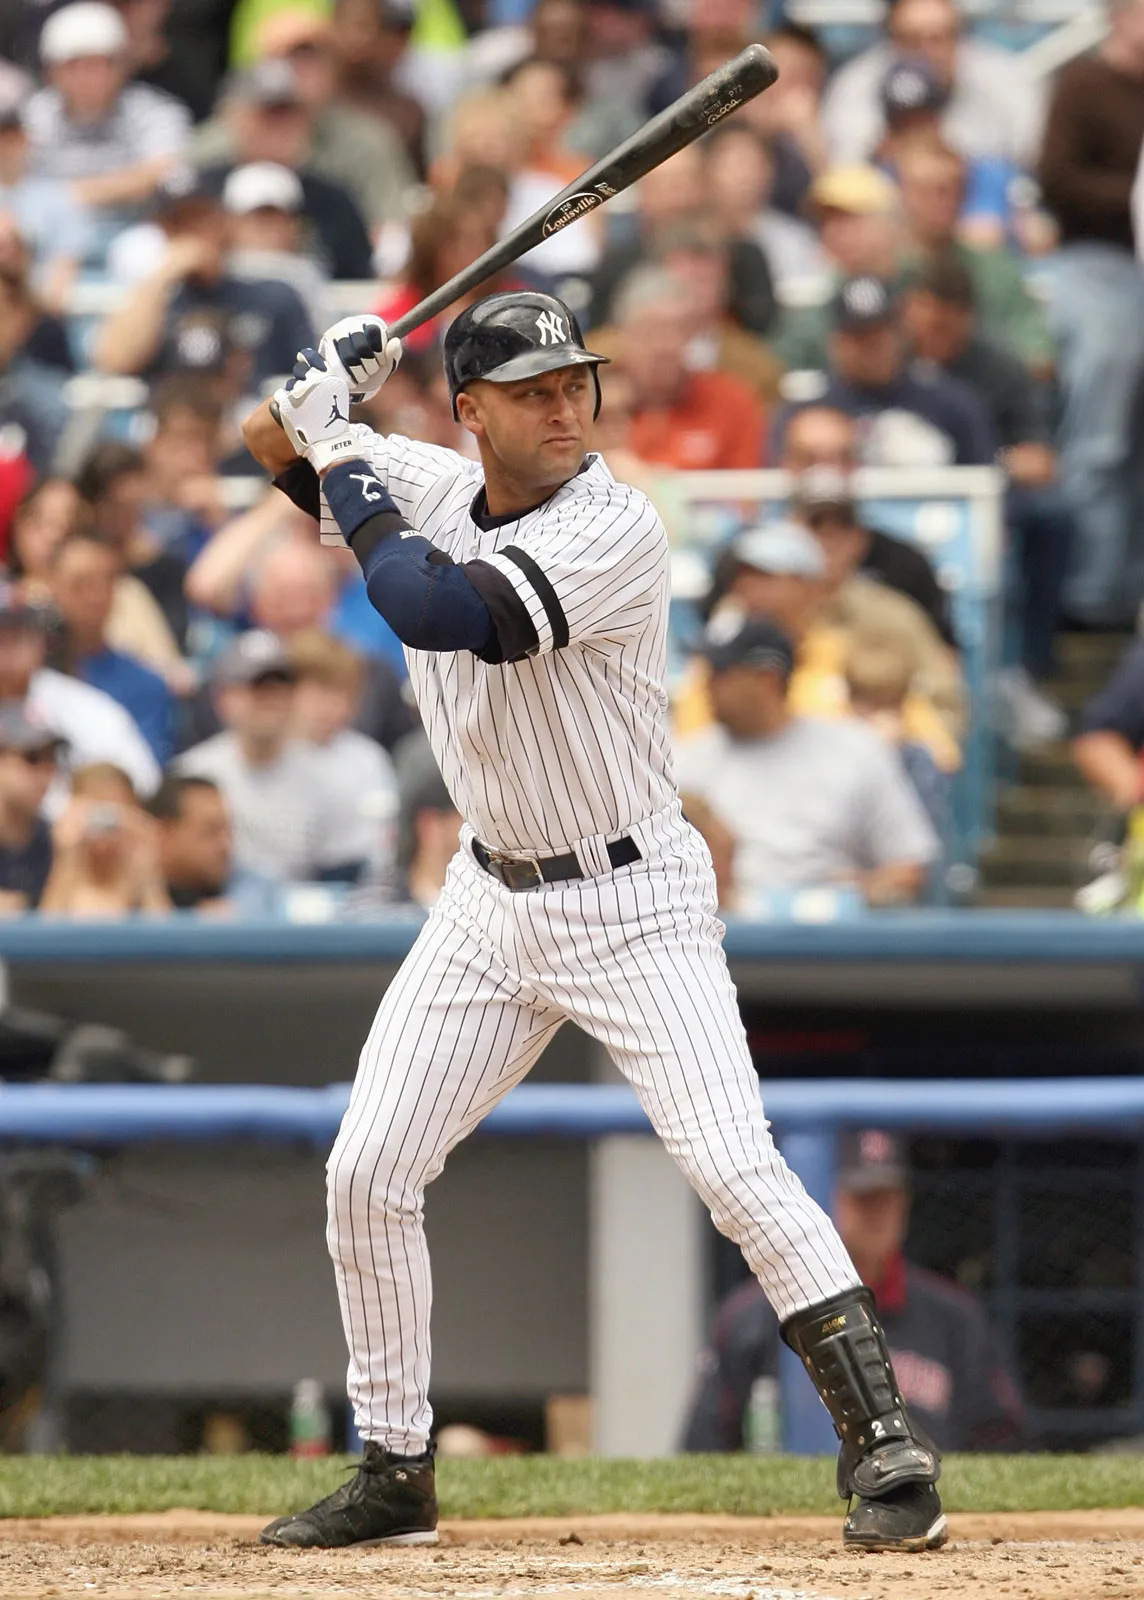 Which team did Derek Jeter defeat in the 2000 World Series to win his third championship?